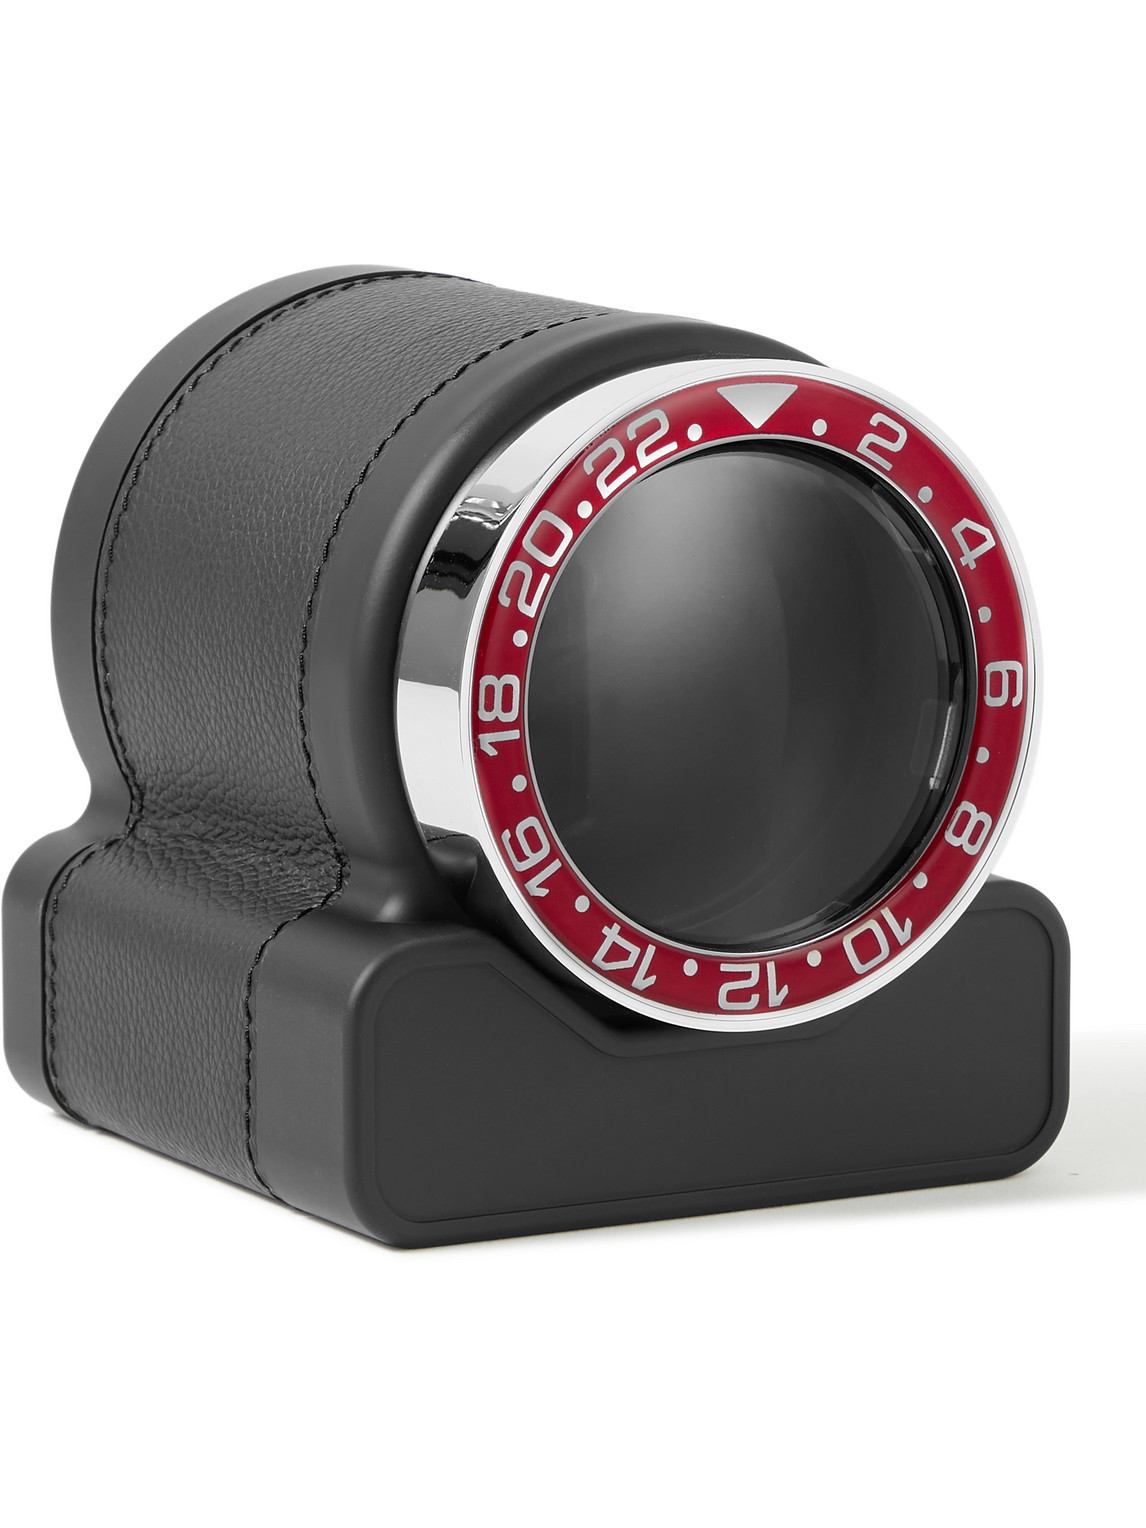 Rotor One Sport Leather Watch Winder